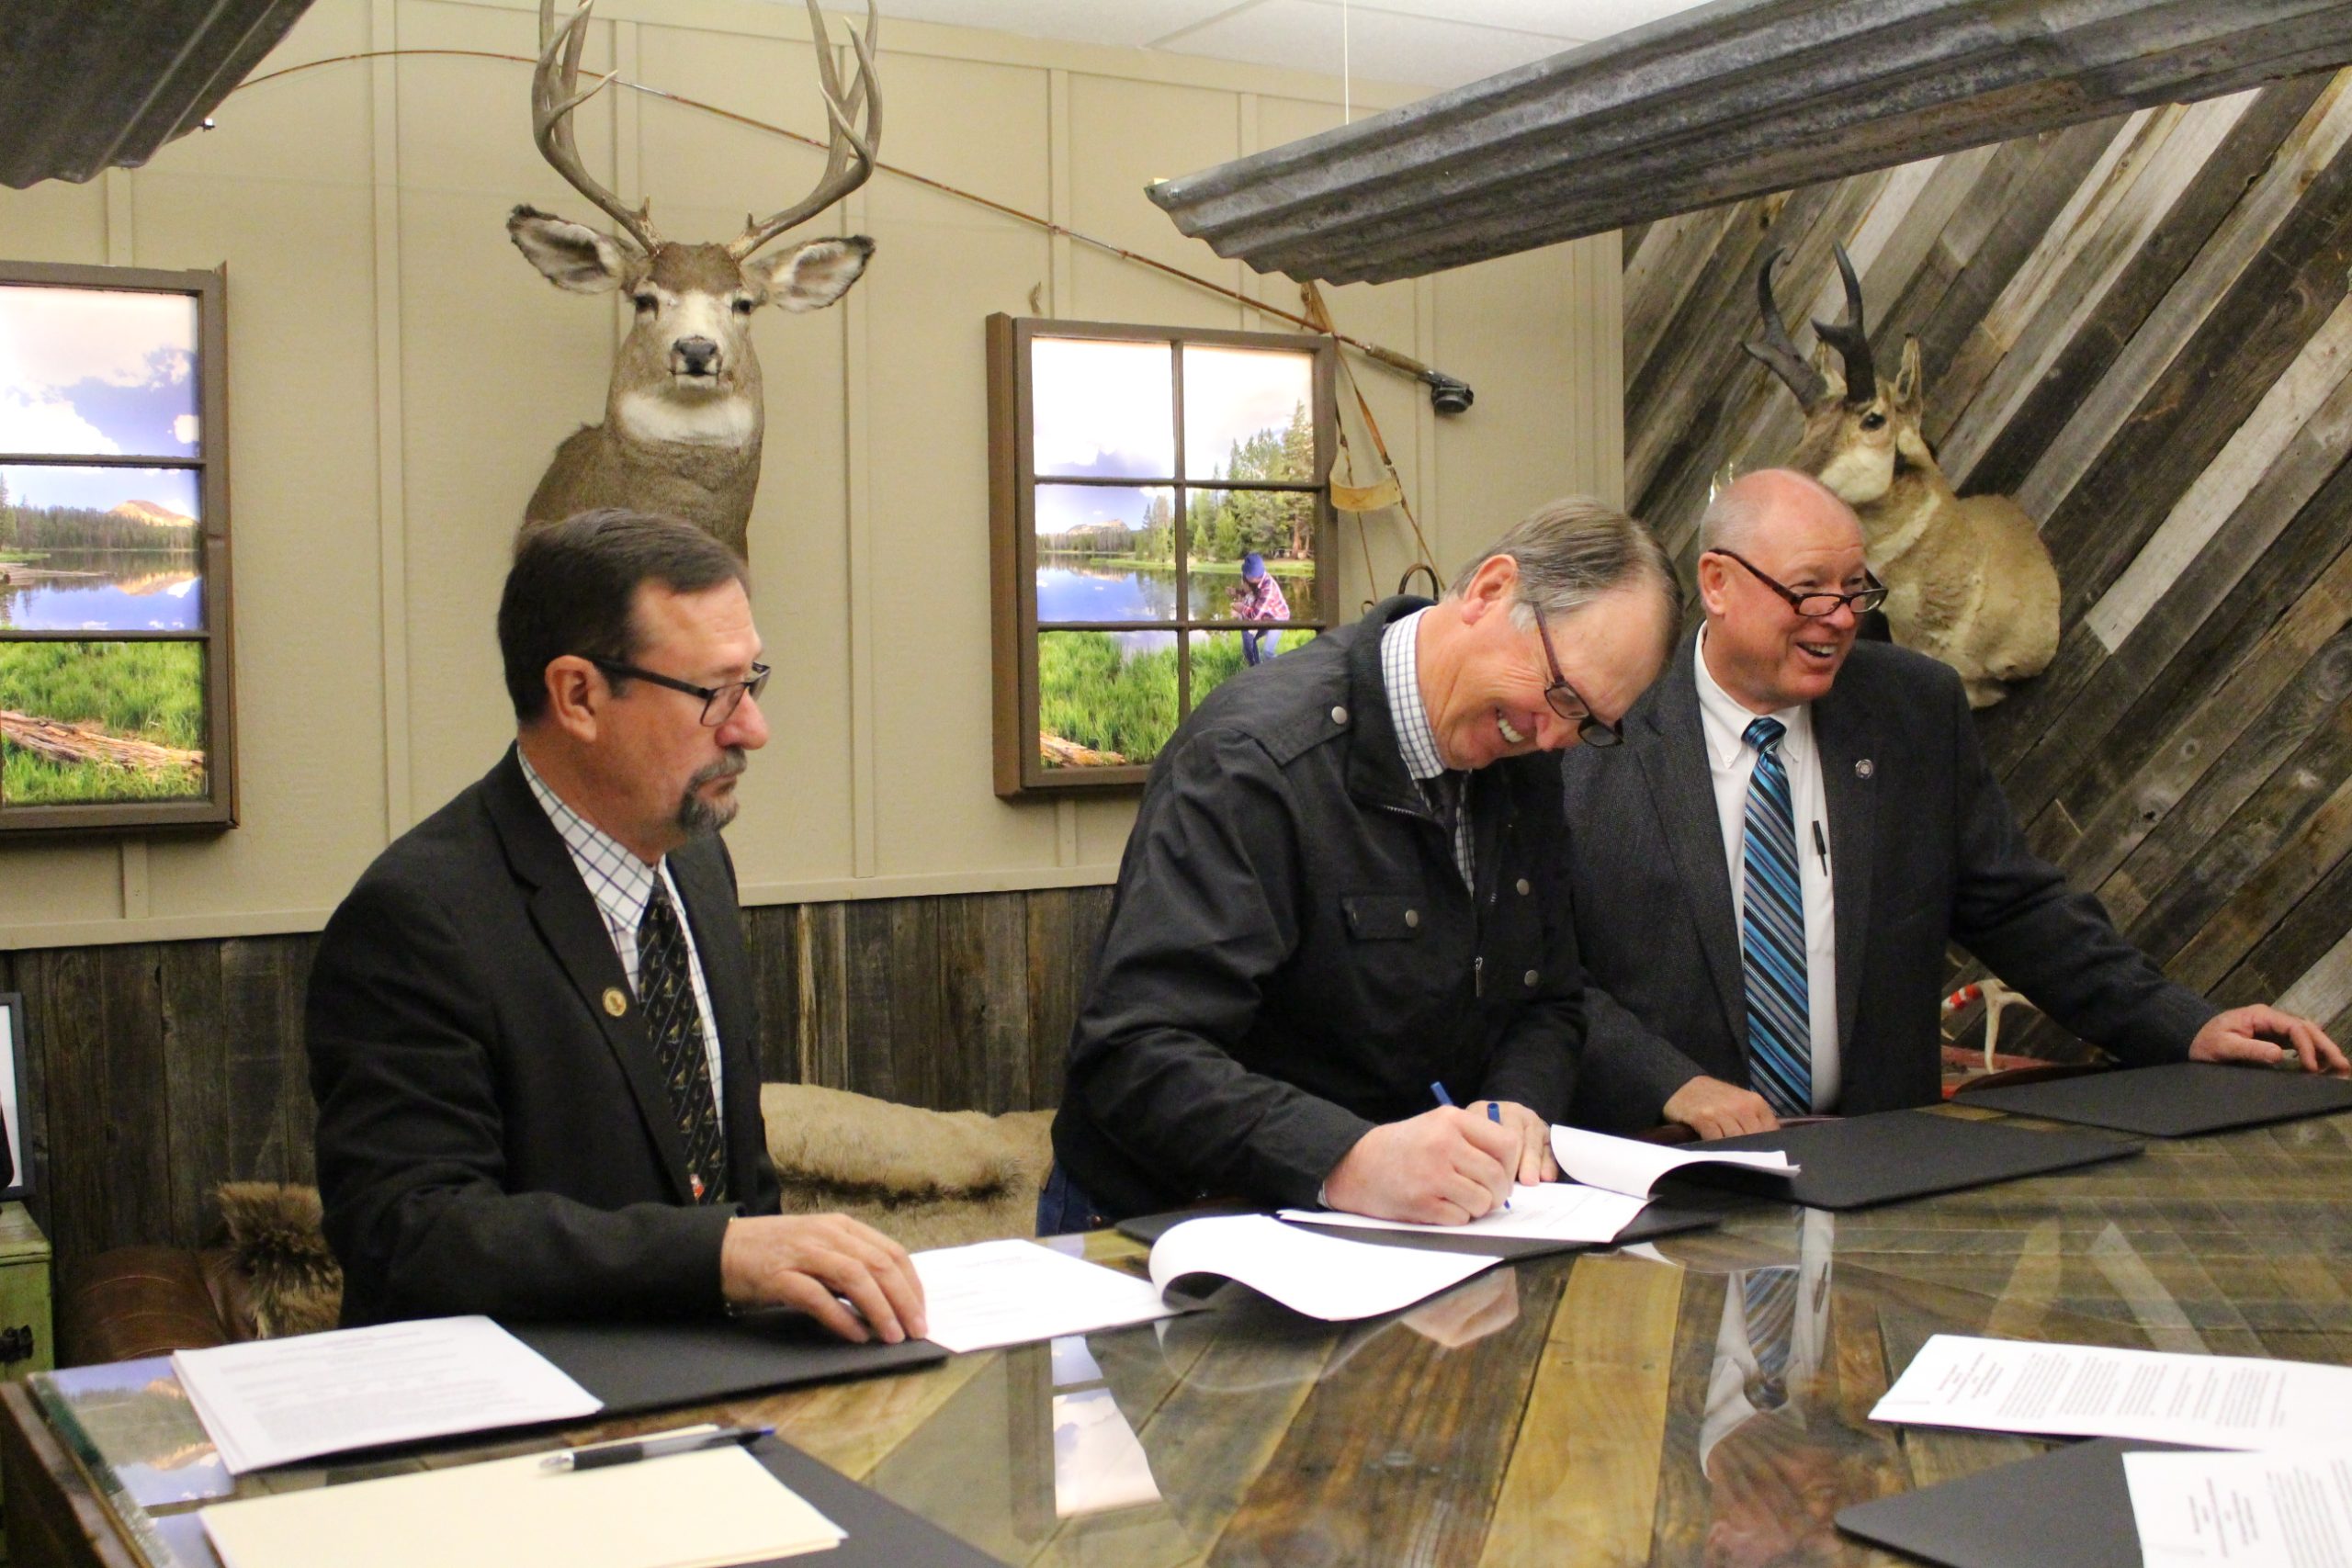 Government officials in a lodge signing the hunter access agreement